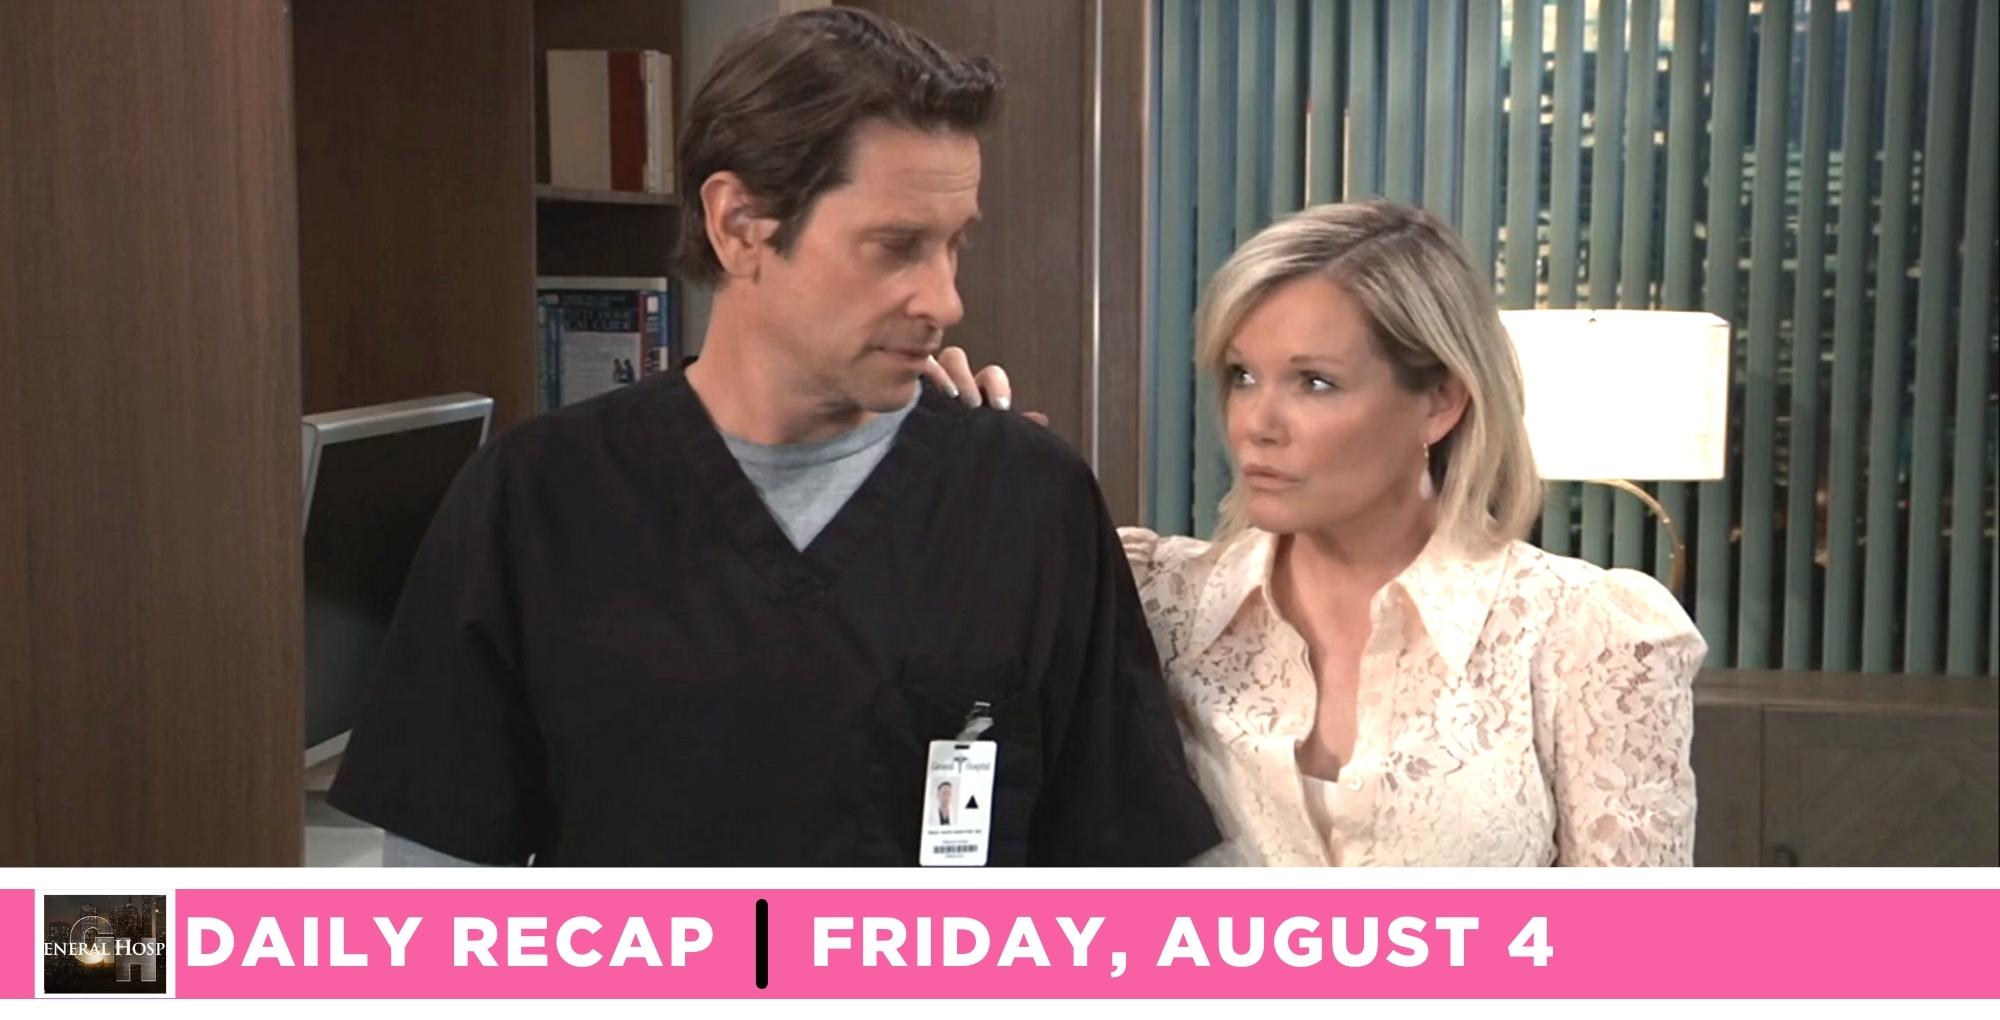 general hospital recap for august 4, 2023, has austin talking to ava in his office.